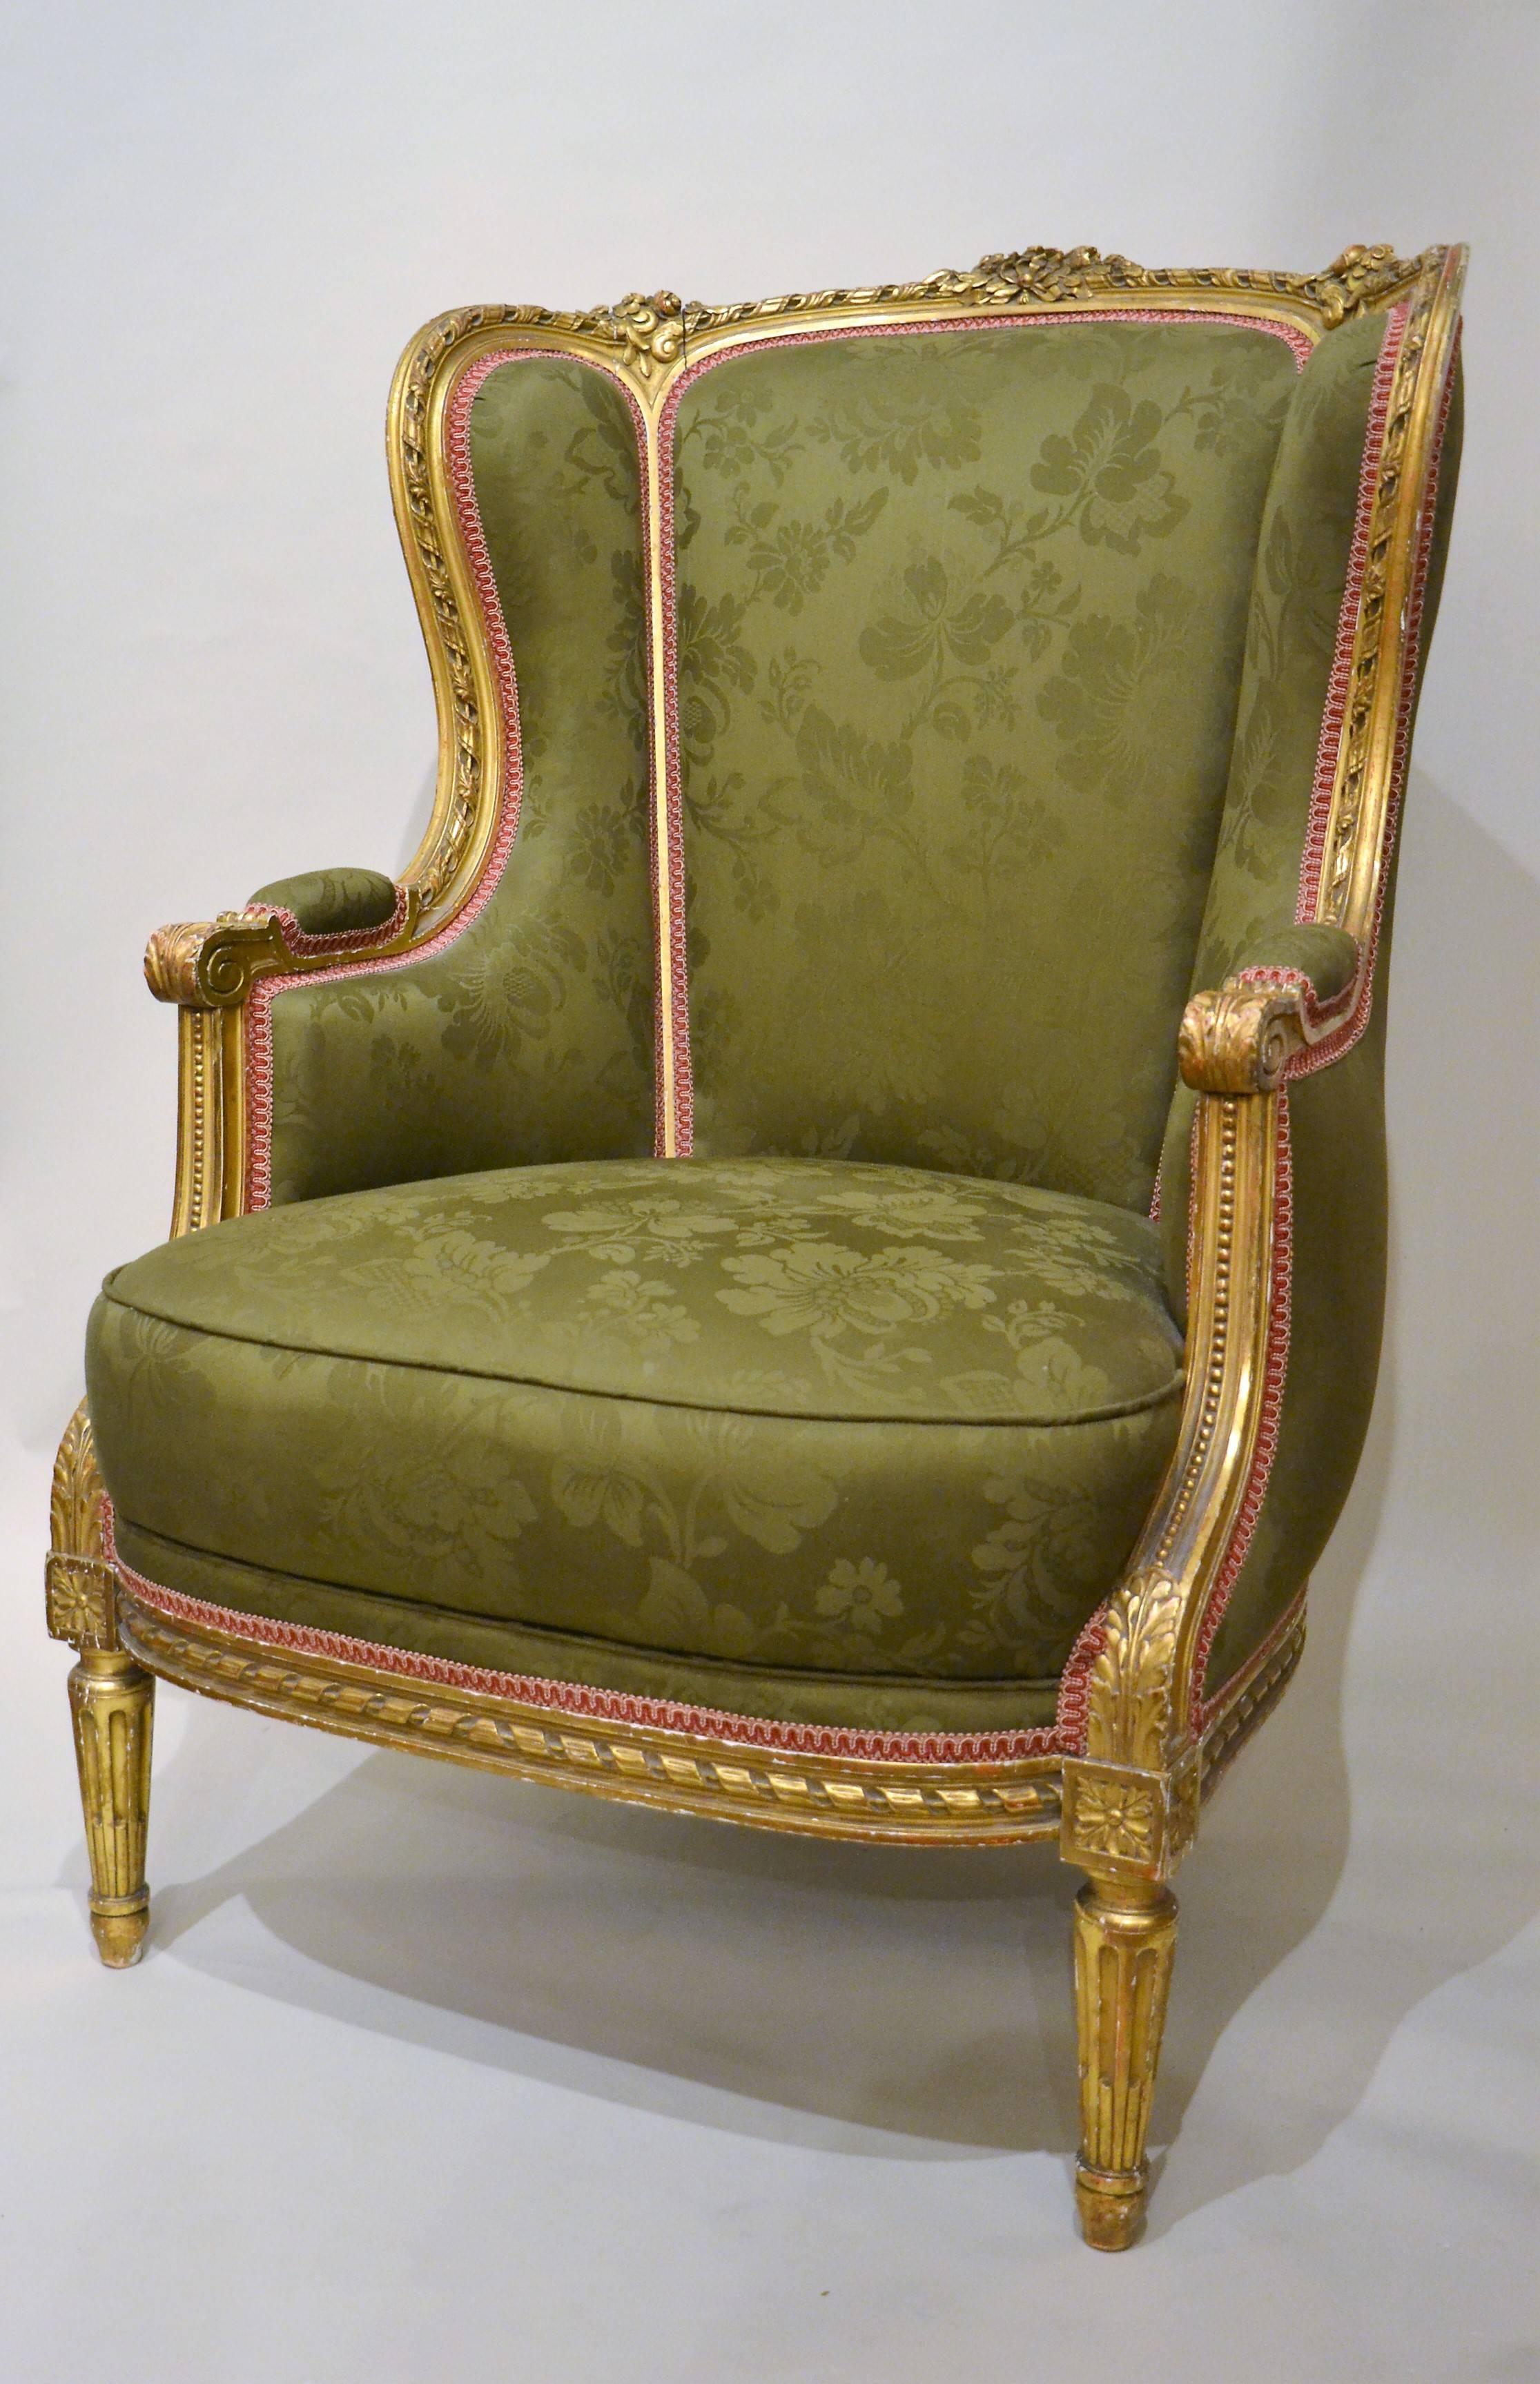 Antique French gold bergère in the style of Louis XVI, circa 1875-1895.